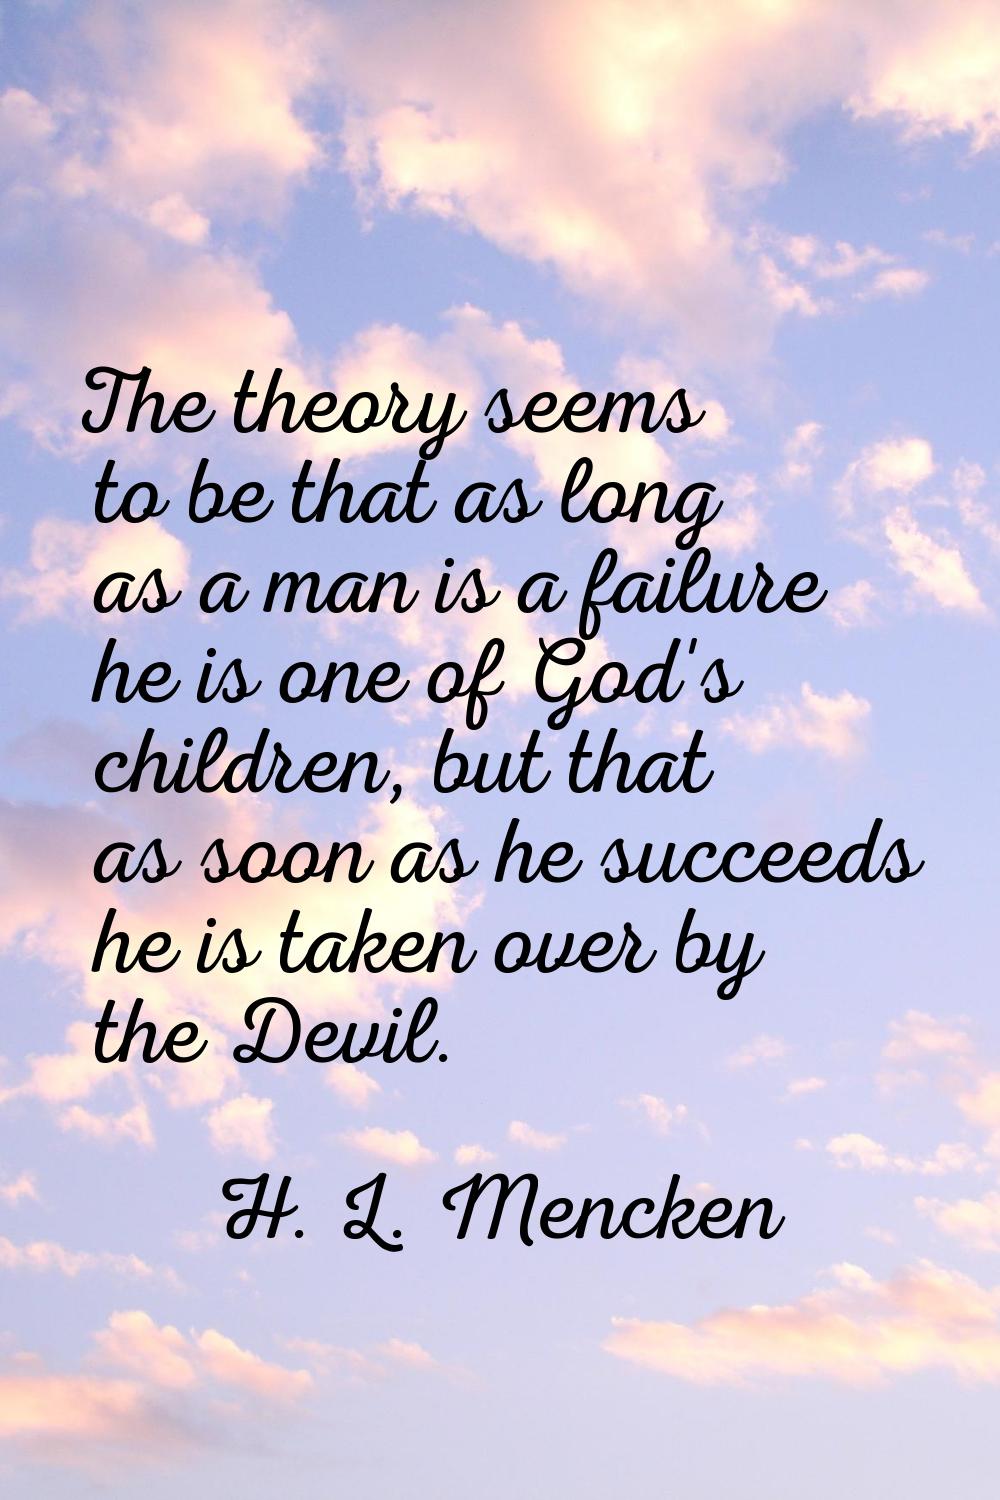 The theory seems to be that as long as a man is a failure he is one of God's children, but that as 